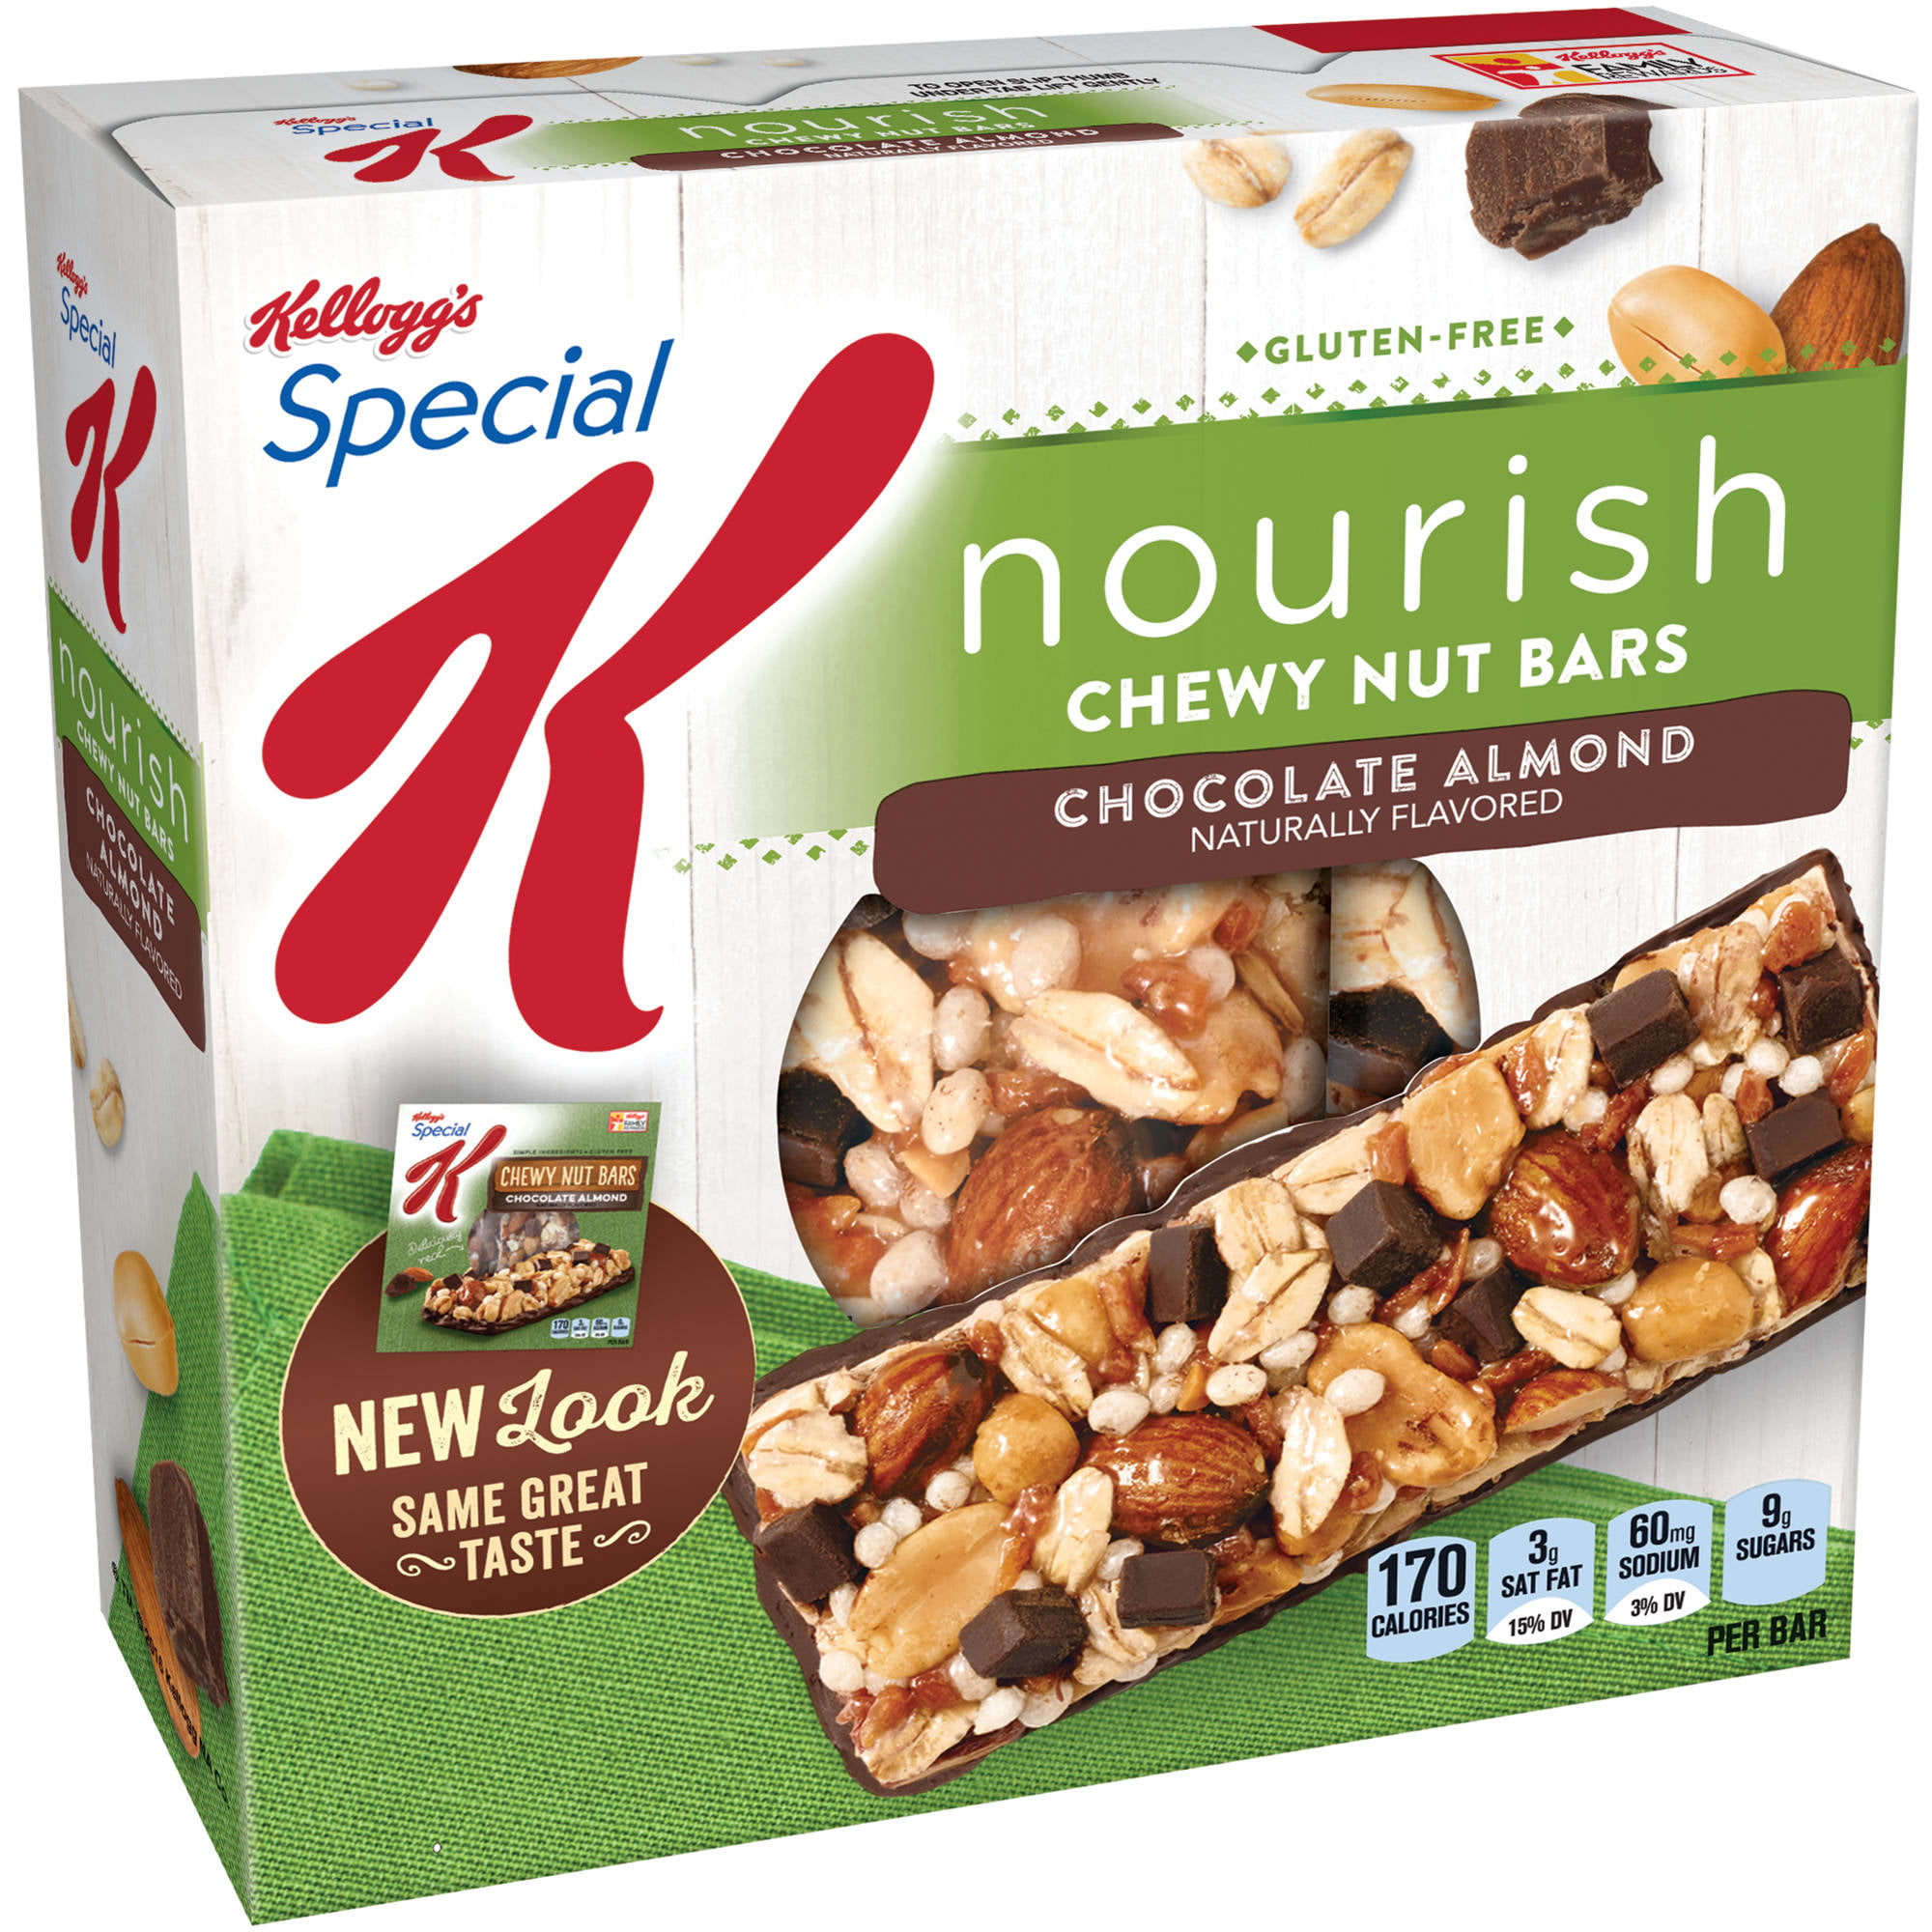 Chewy Peanut Bars Video Kellogg's Special K Chocolate Almond Chewy Nut Bars, 5 count, 5.82 oz